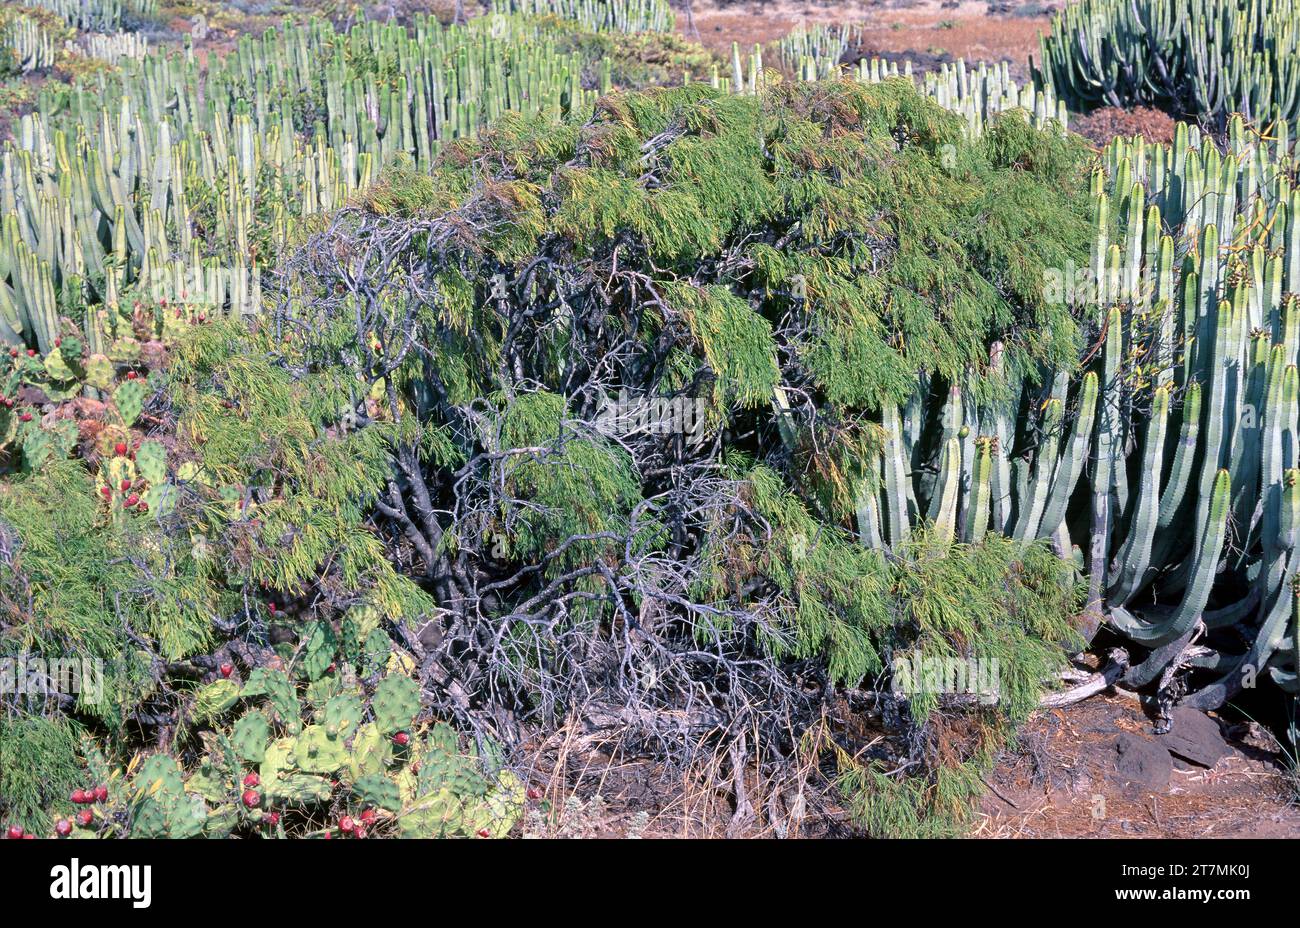 Balo (Plocama pendula) surrounded by cardon (Euphorbia canariensis). Balo is a shrub endemic to all Canary Islands except Lanzarote. This photo was ta Stock Photo